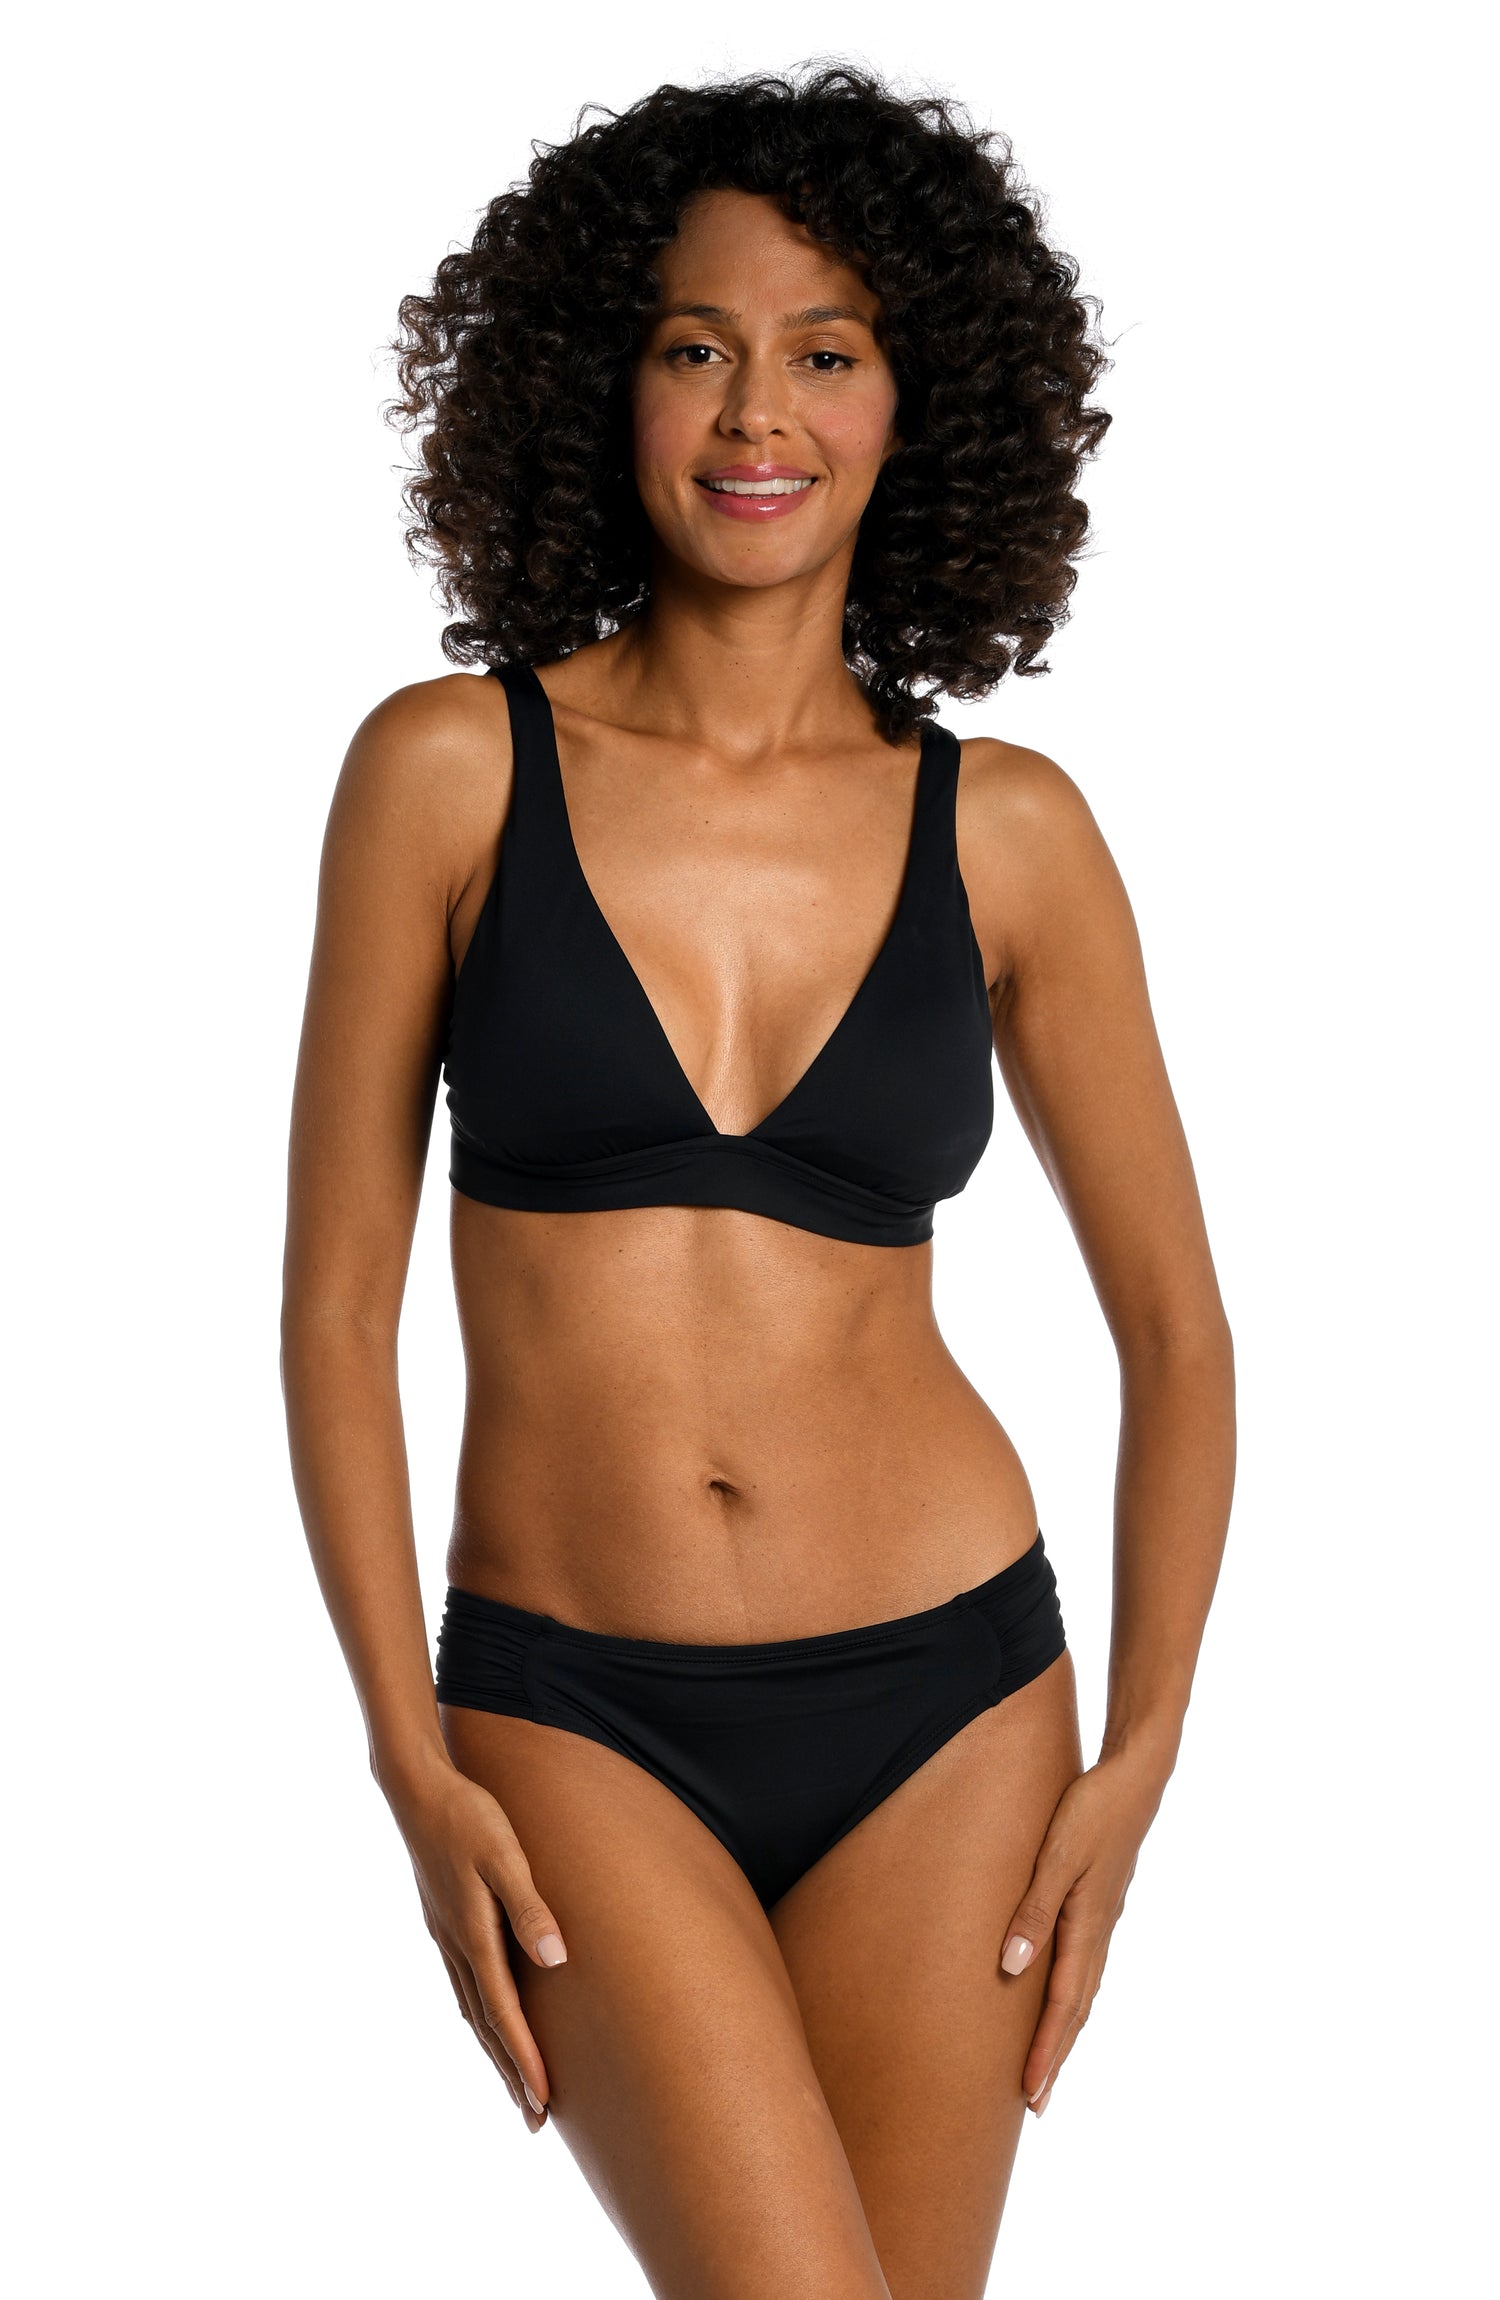 Model is wearing a black tall triangle swimsuit top from our Best-Selling Island Goddess collection.